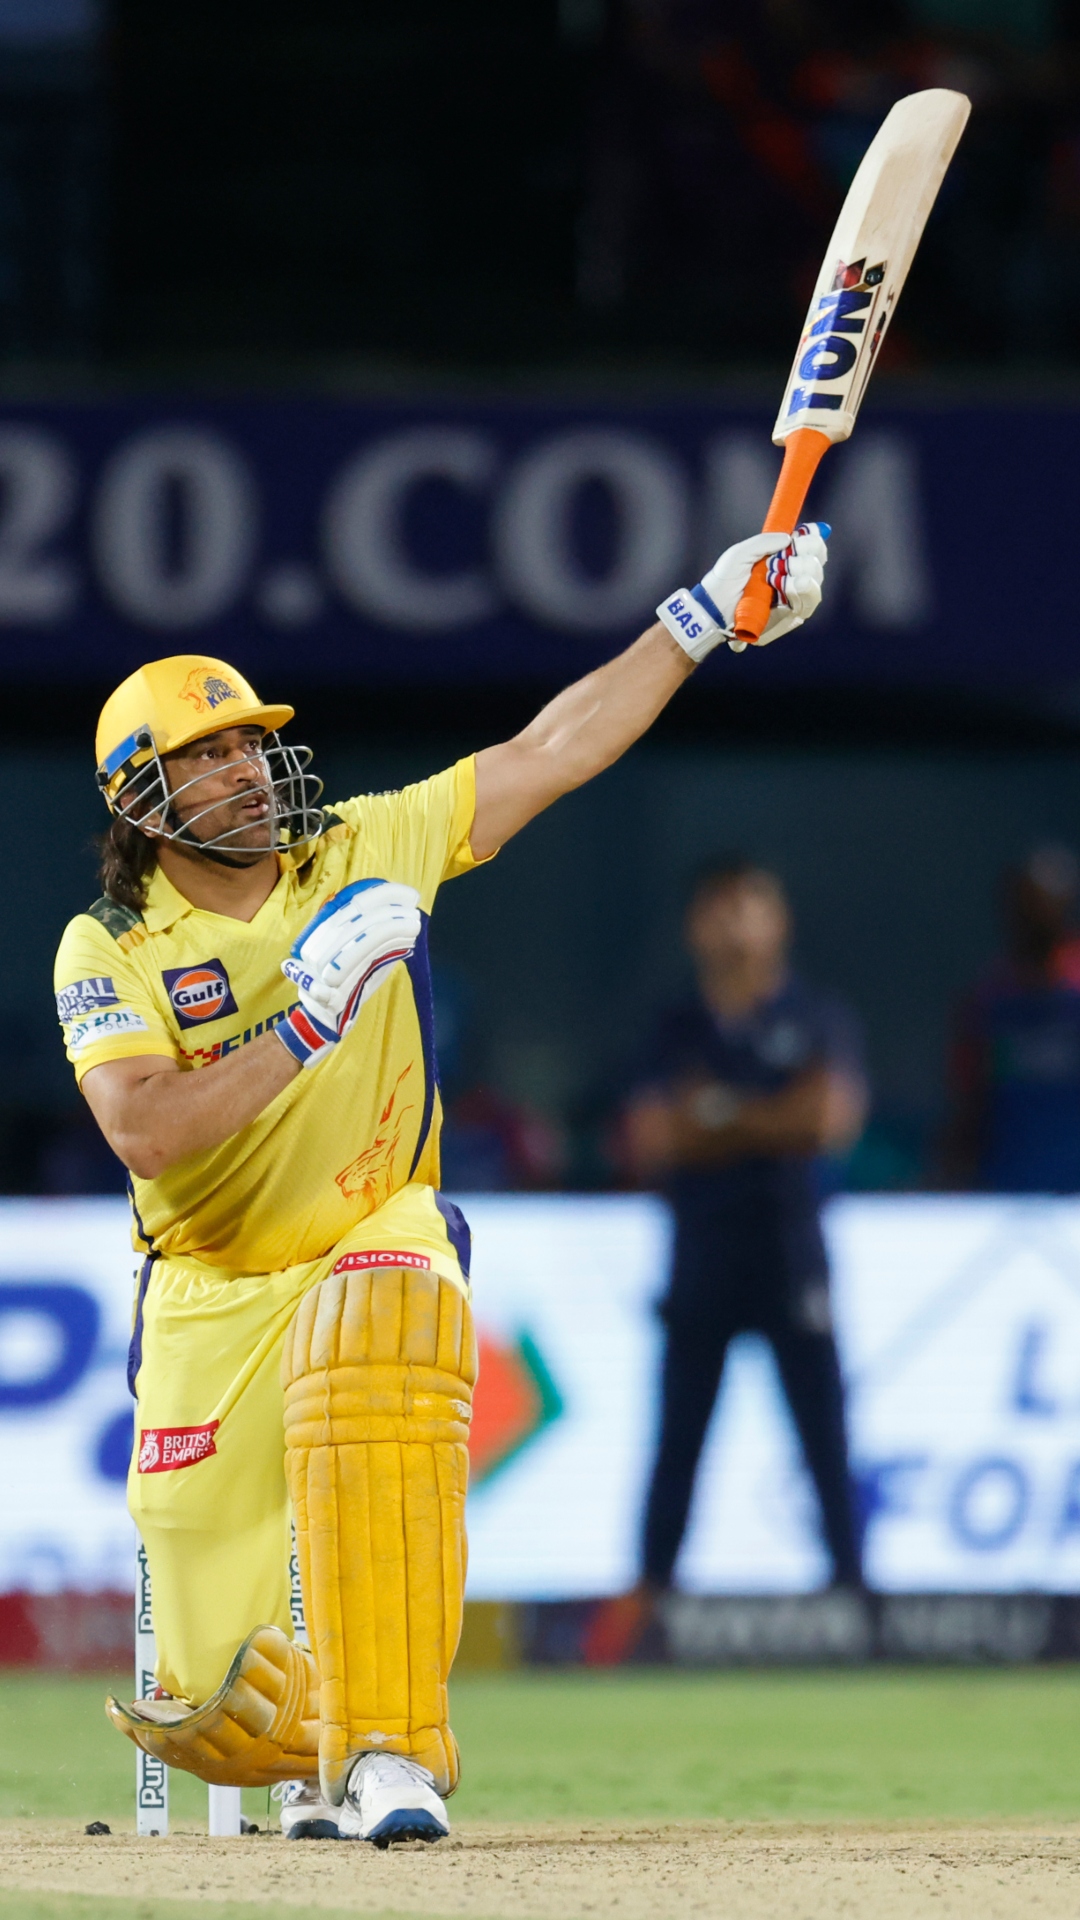 Records broken and milestones registered by MS Dhoni during DC vs CSK clash
